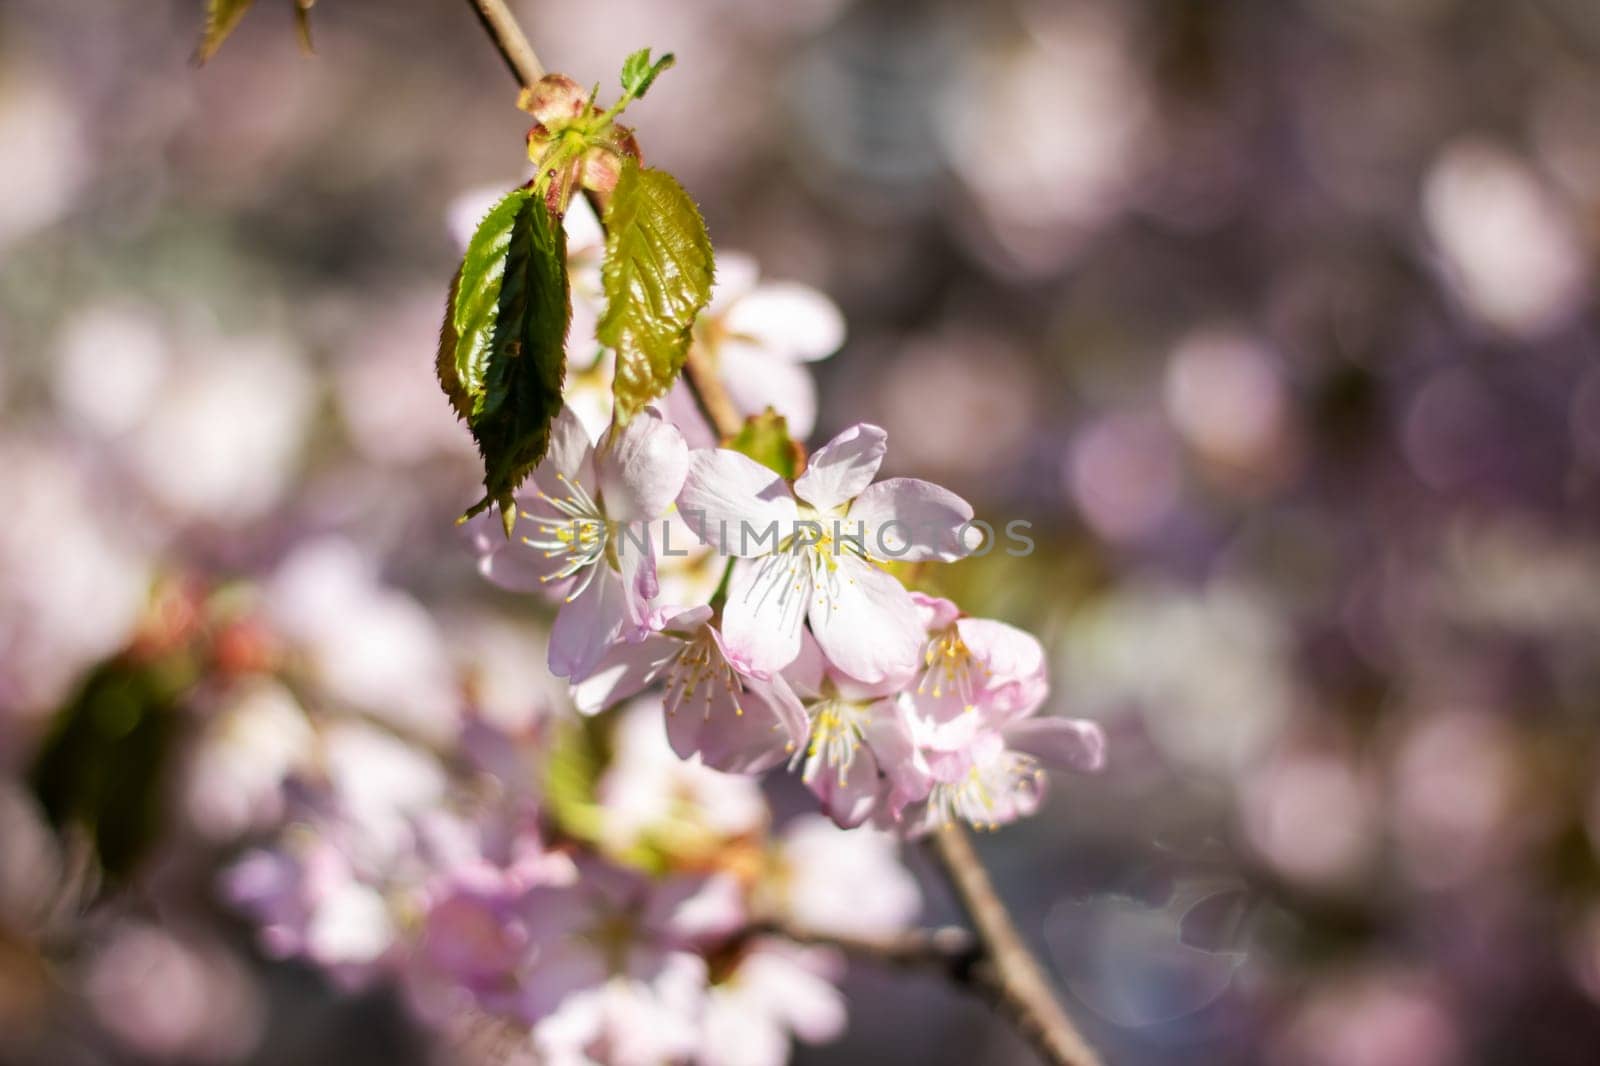 A closeup shot of the beautiful cherry blossoms on a tree branch, showcasing the delicate petals of the flowering plant in full bloom